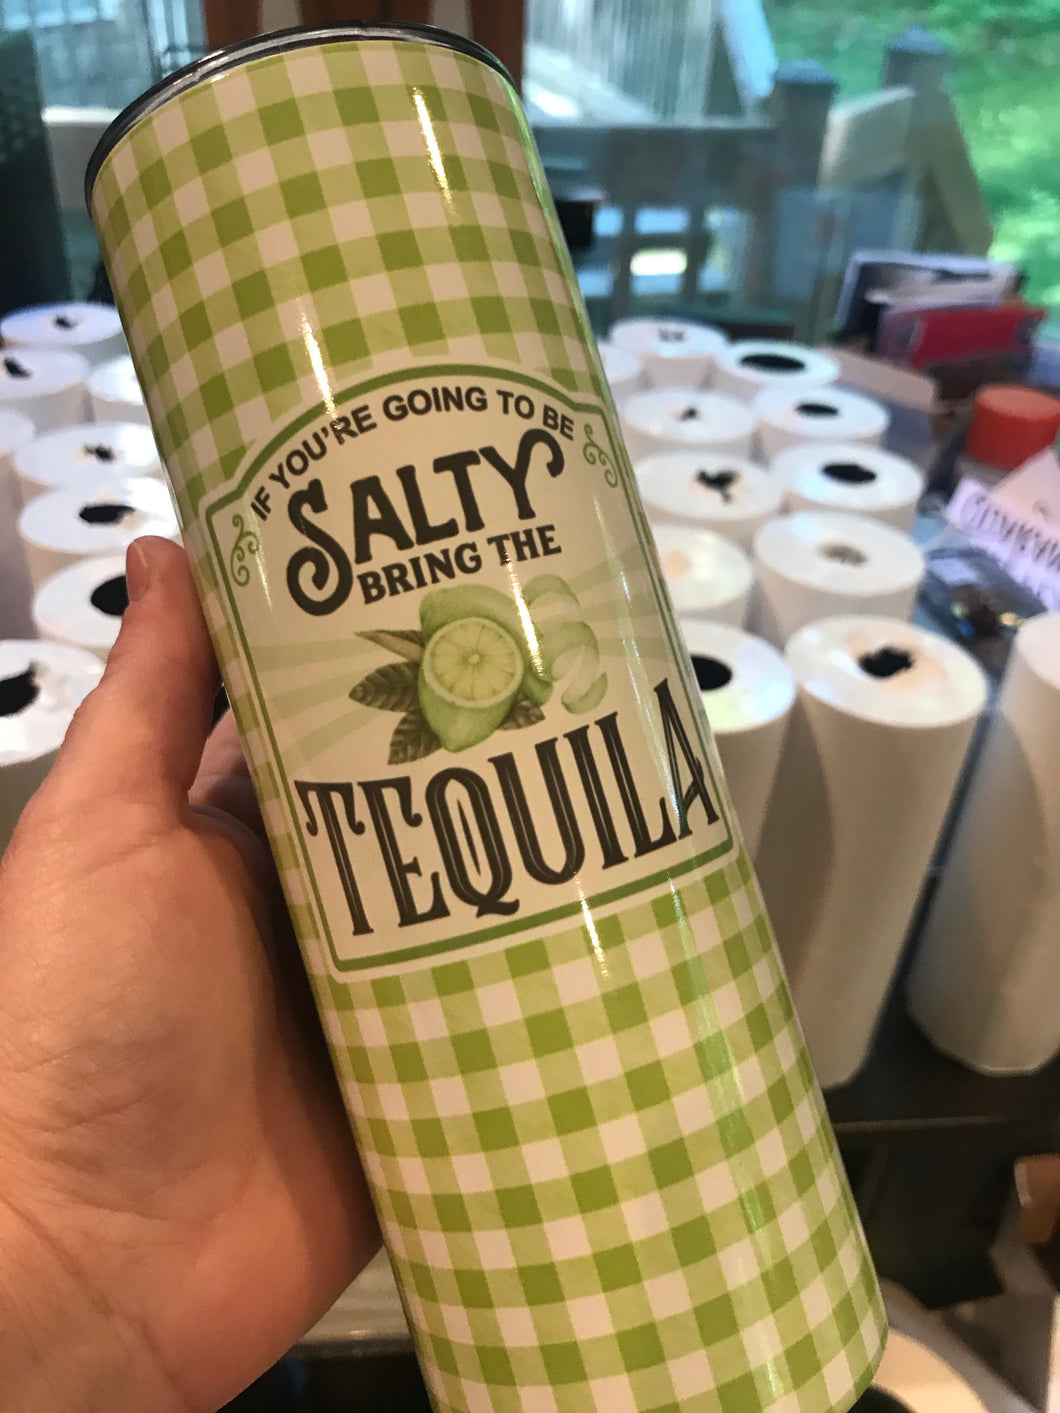 If you are going to be salty bring the Tequila  | Stainless Skinny Tumbler | The Good Life Creations